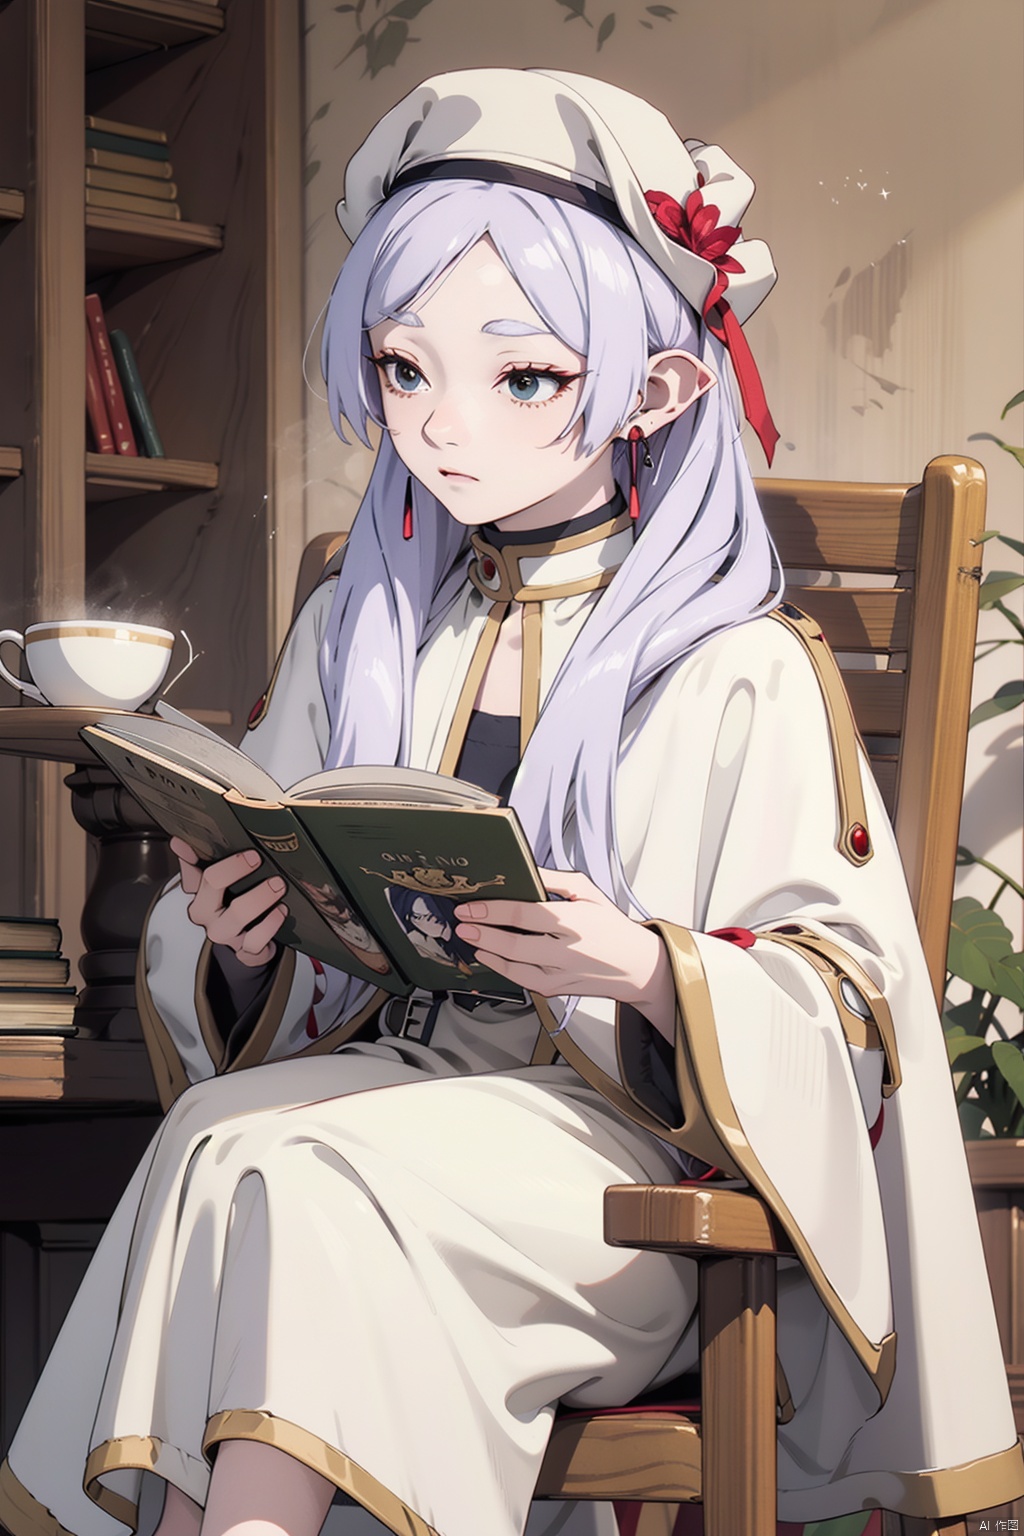  Frieren at the Funeral,Goblin ear,1 girl,knowledge of patchouli,solo,white hair,long hair,cup,hat,new moon,tea cup,book,sitting,ribbon,reading,cloak,chair,tea,anime coloring,hair bow,treeribbon,, REVERSE UPRIGHT STRADDLE